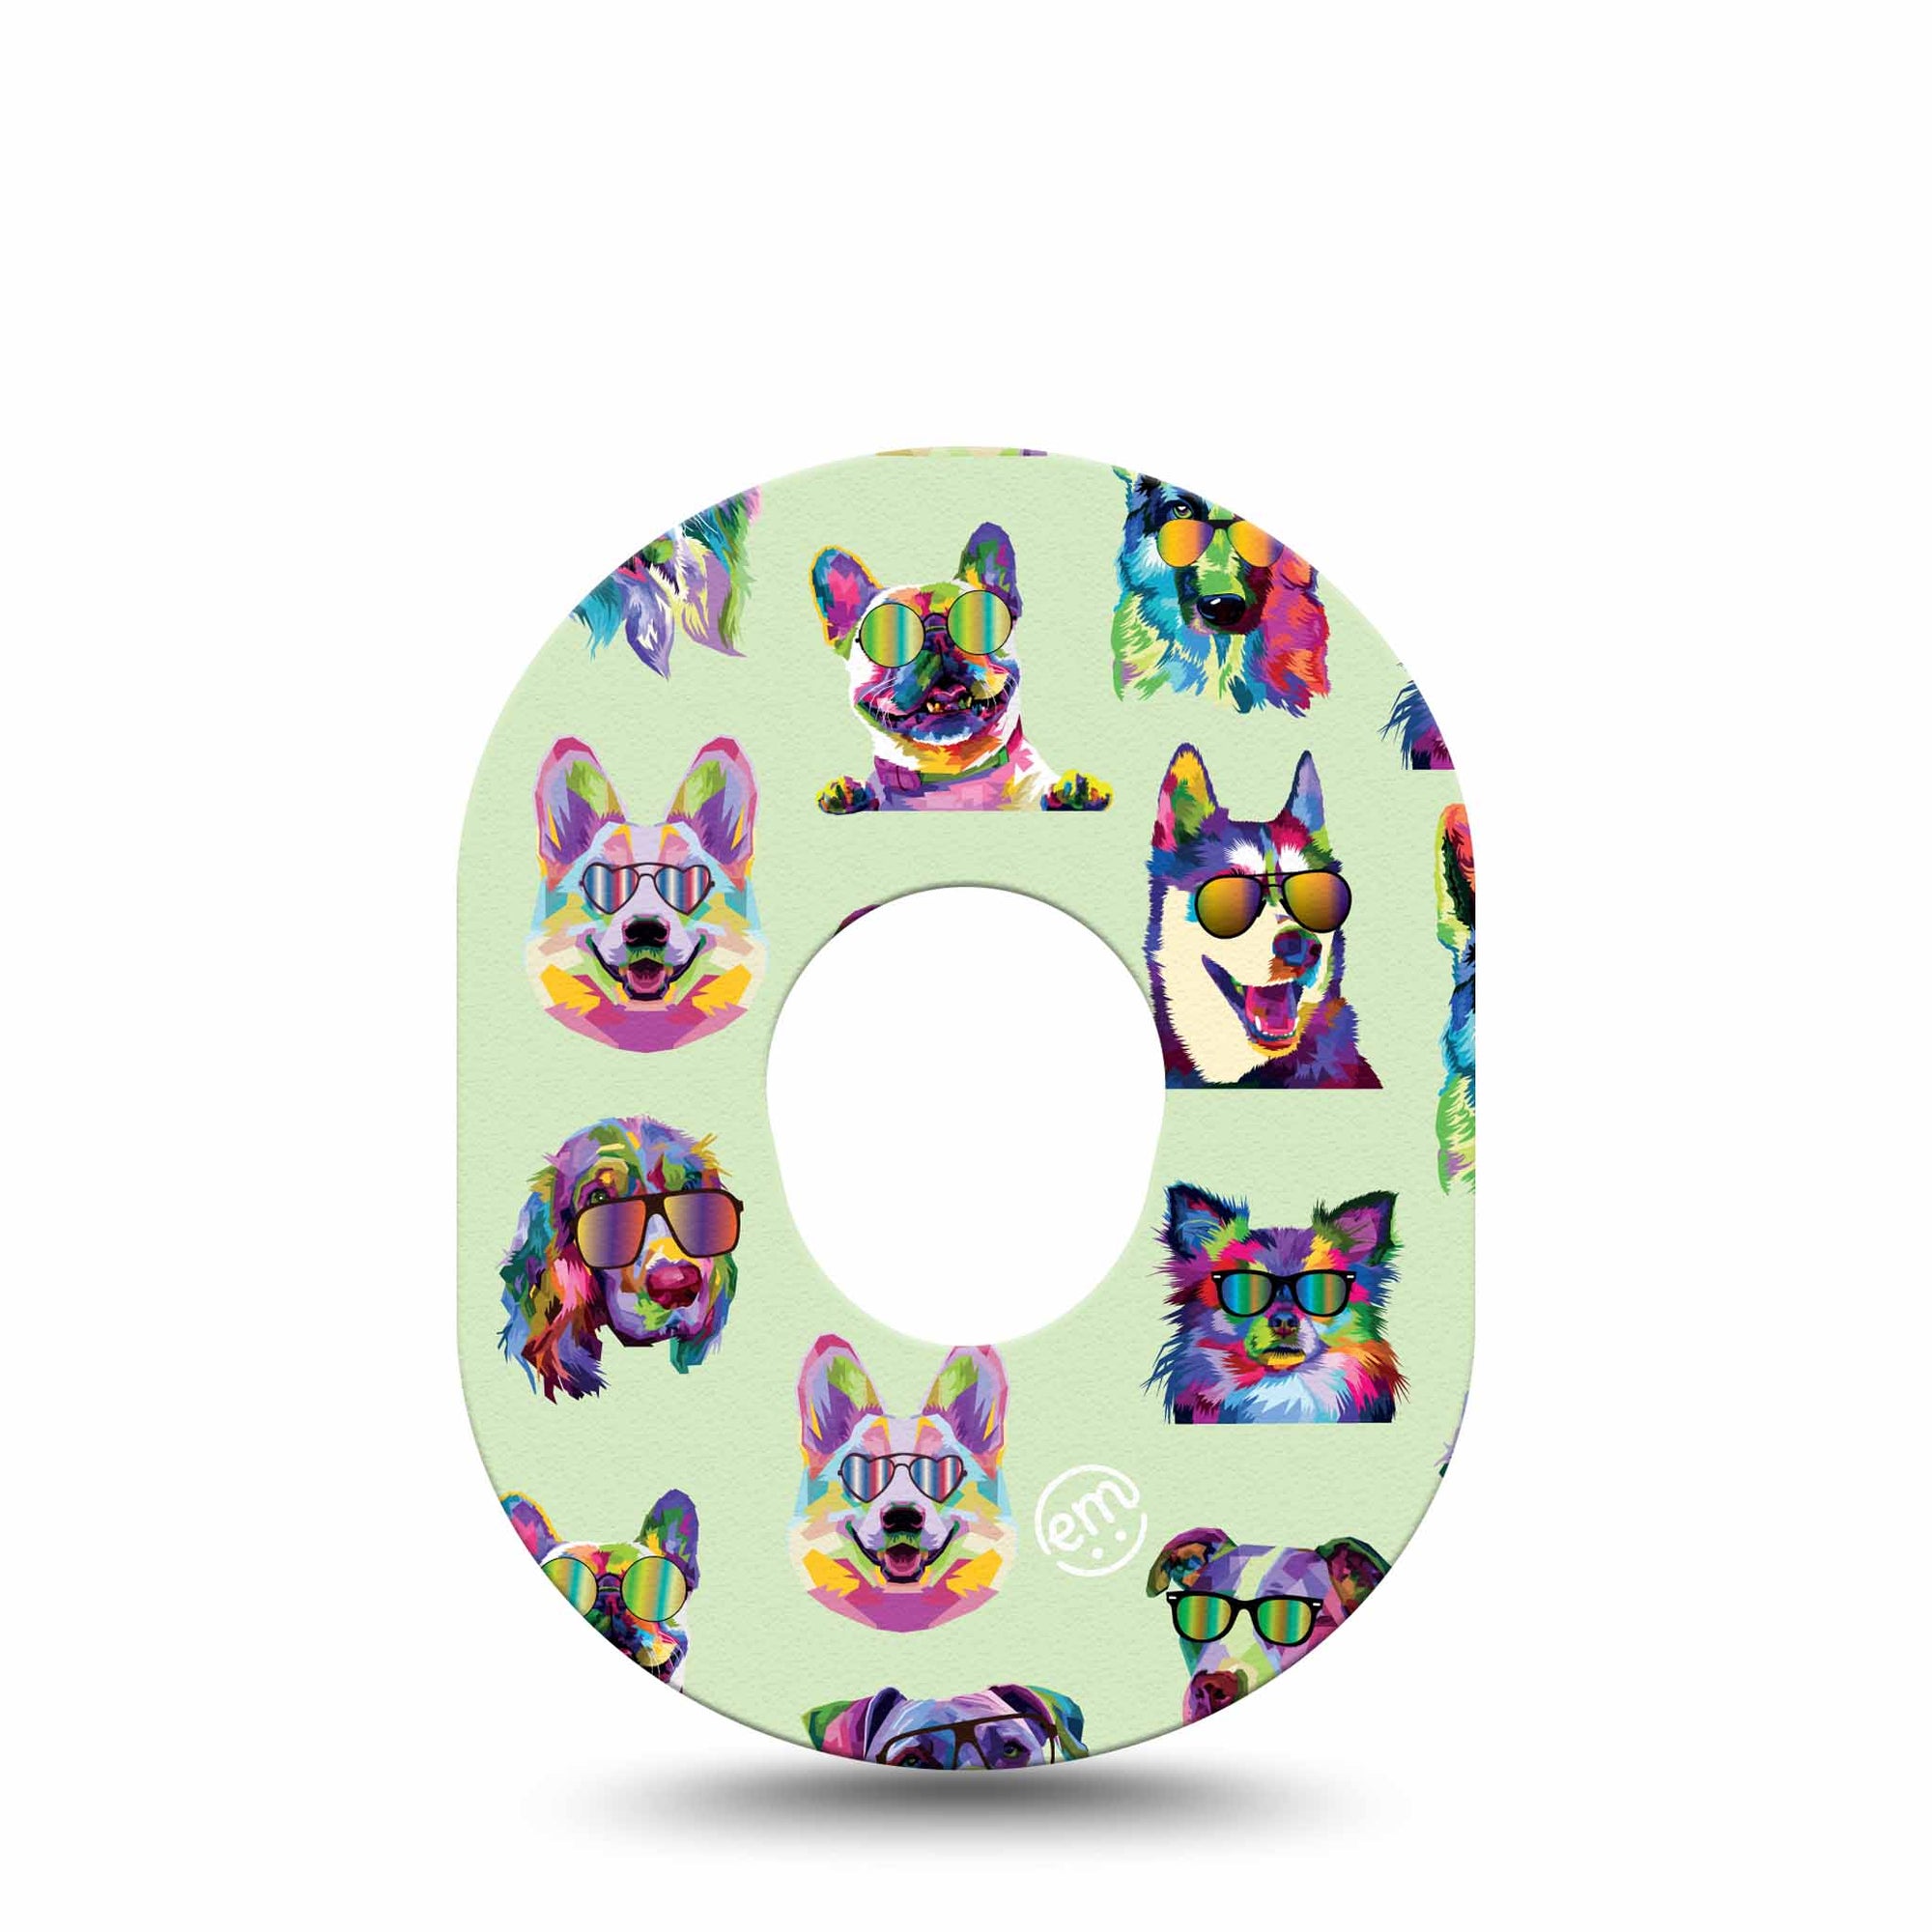 ExpressionMed Dog Party Dexcom G7 Tape, Single, Cute Dogs Inspired, CGM Patch Design